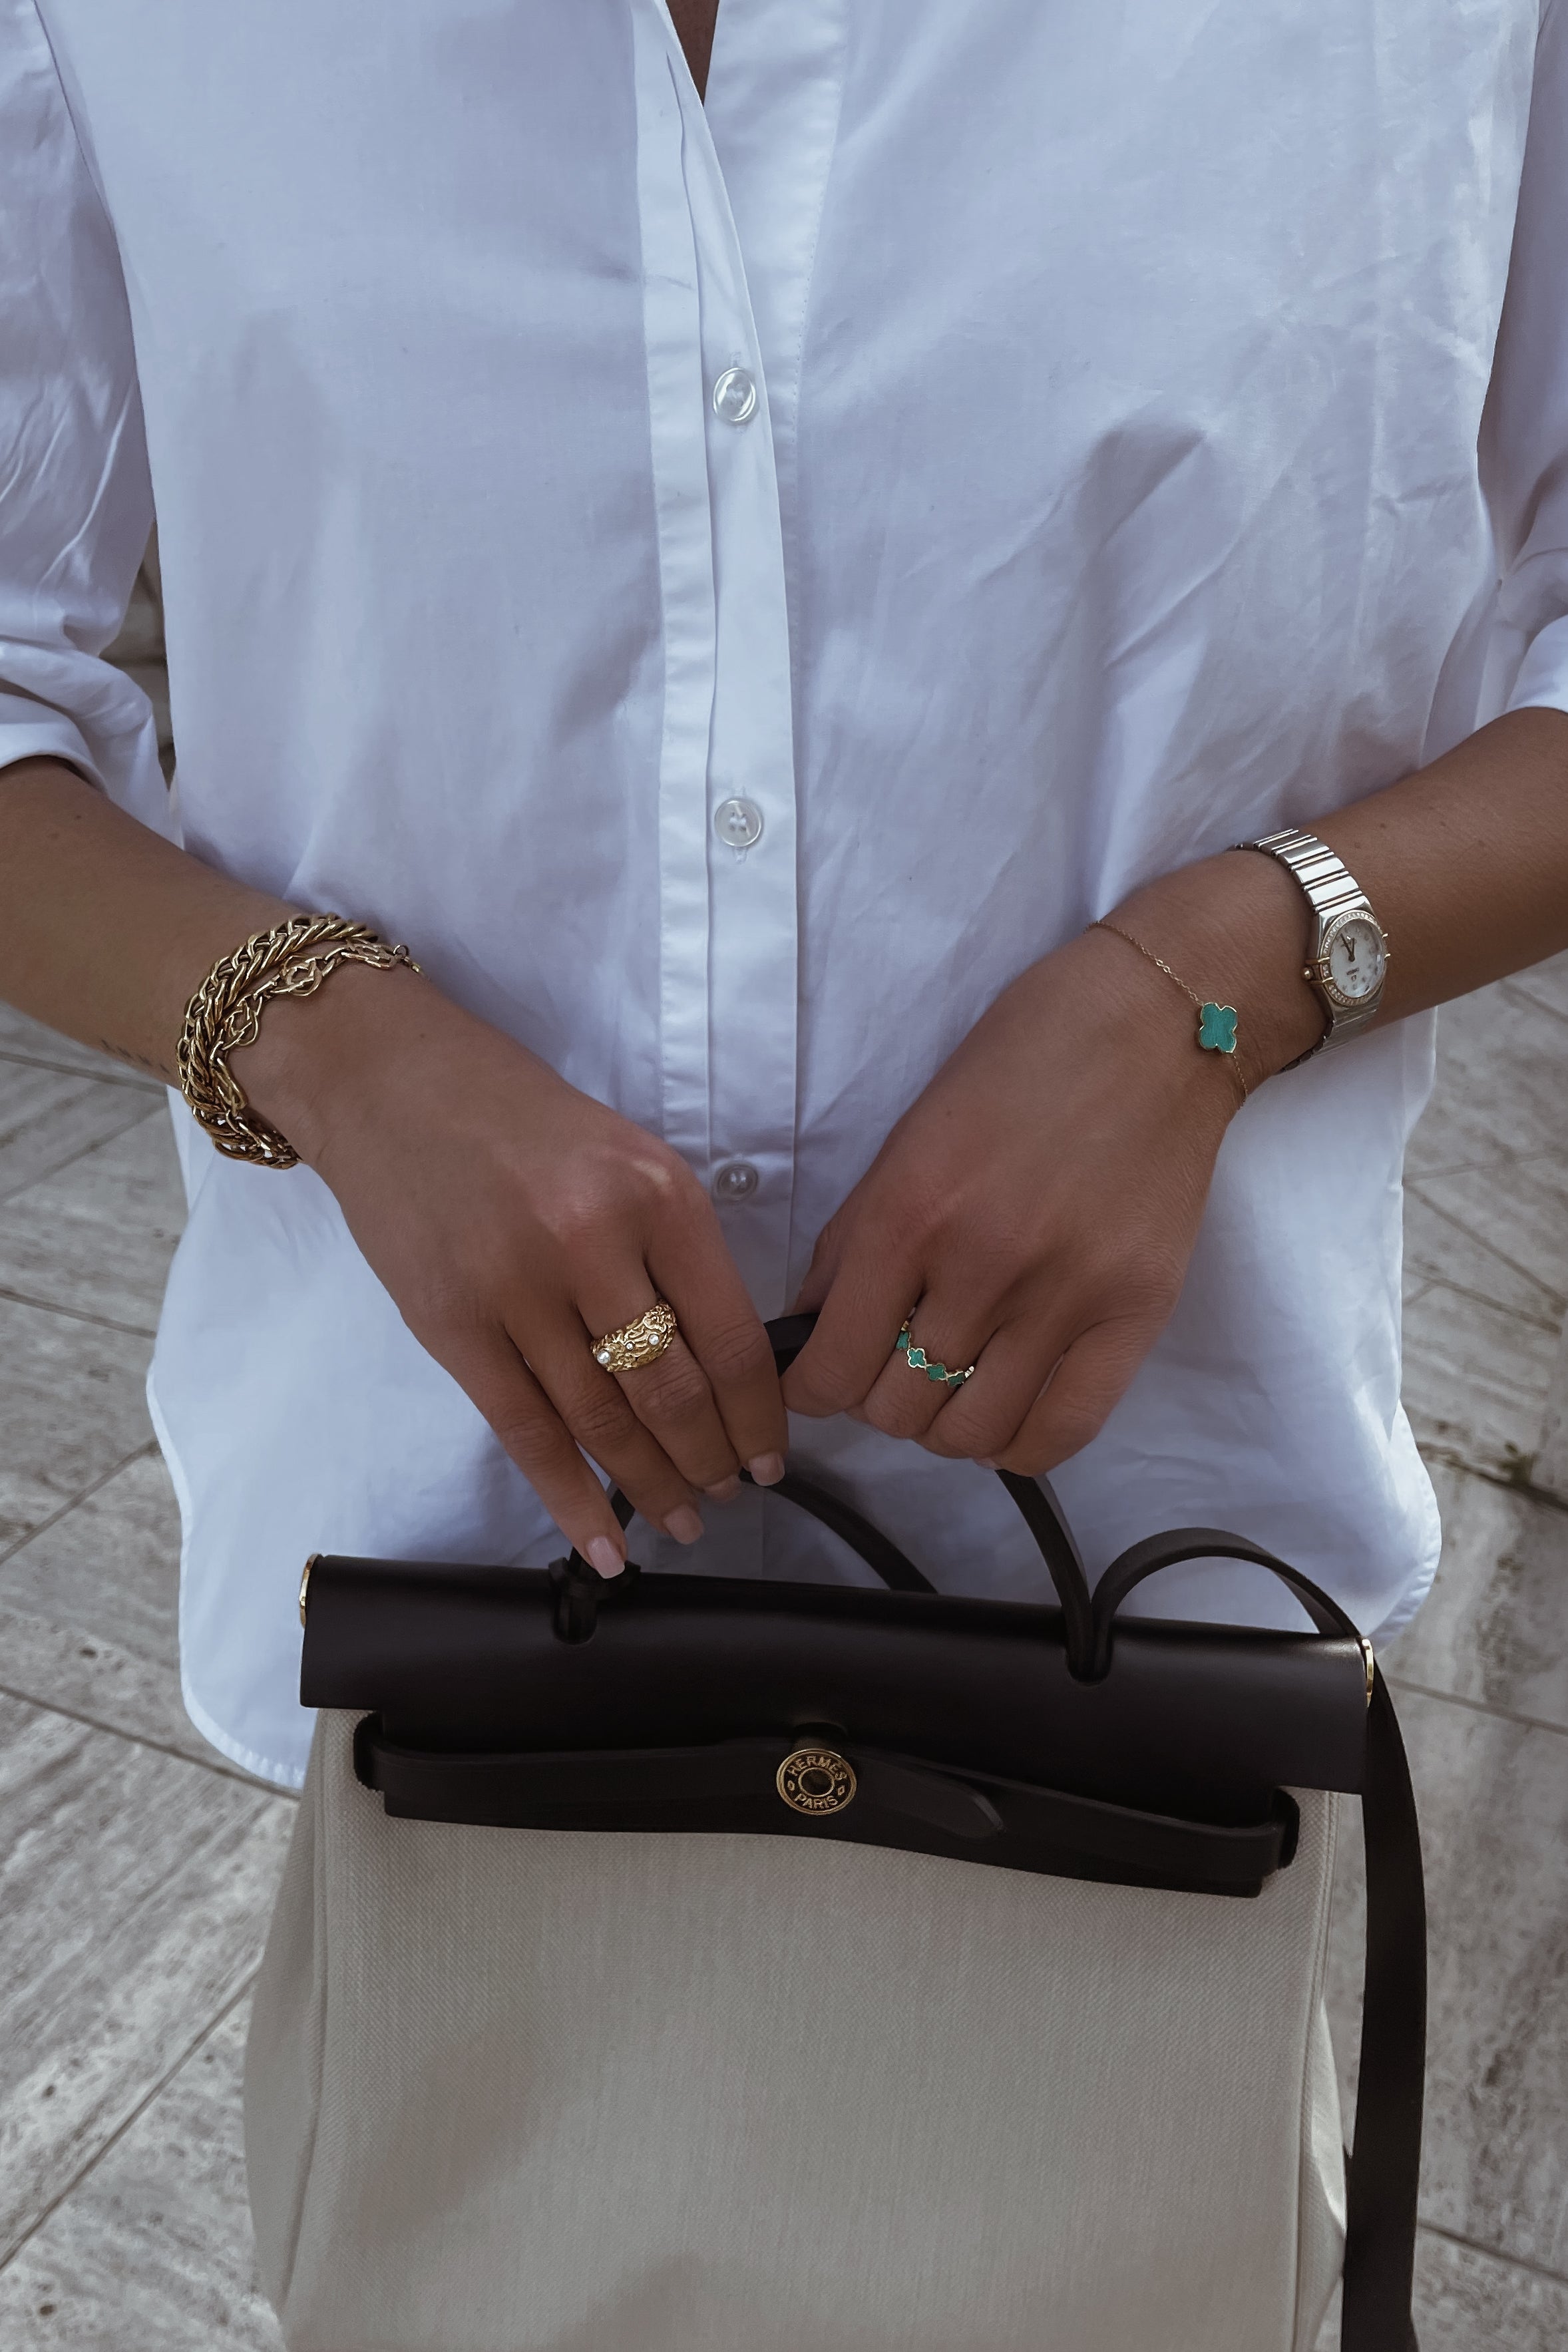 Walde Ring - Boutique Minimaliste has waterproof, durable, elegant and vintage inspired jewelry